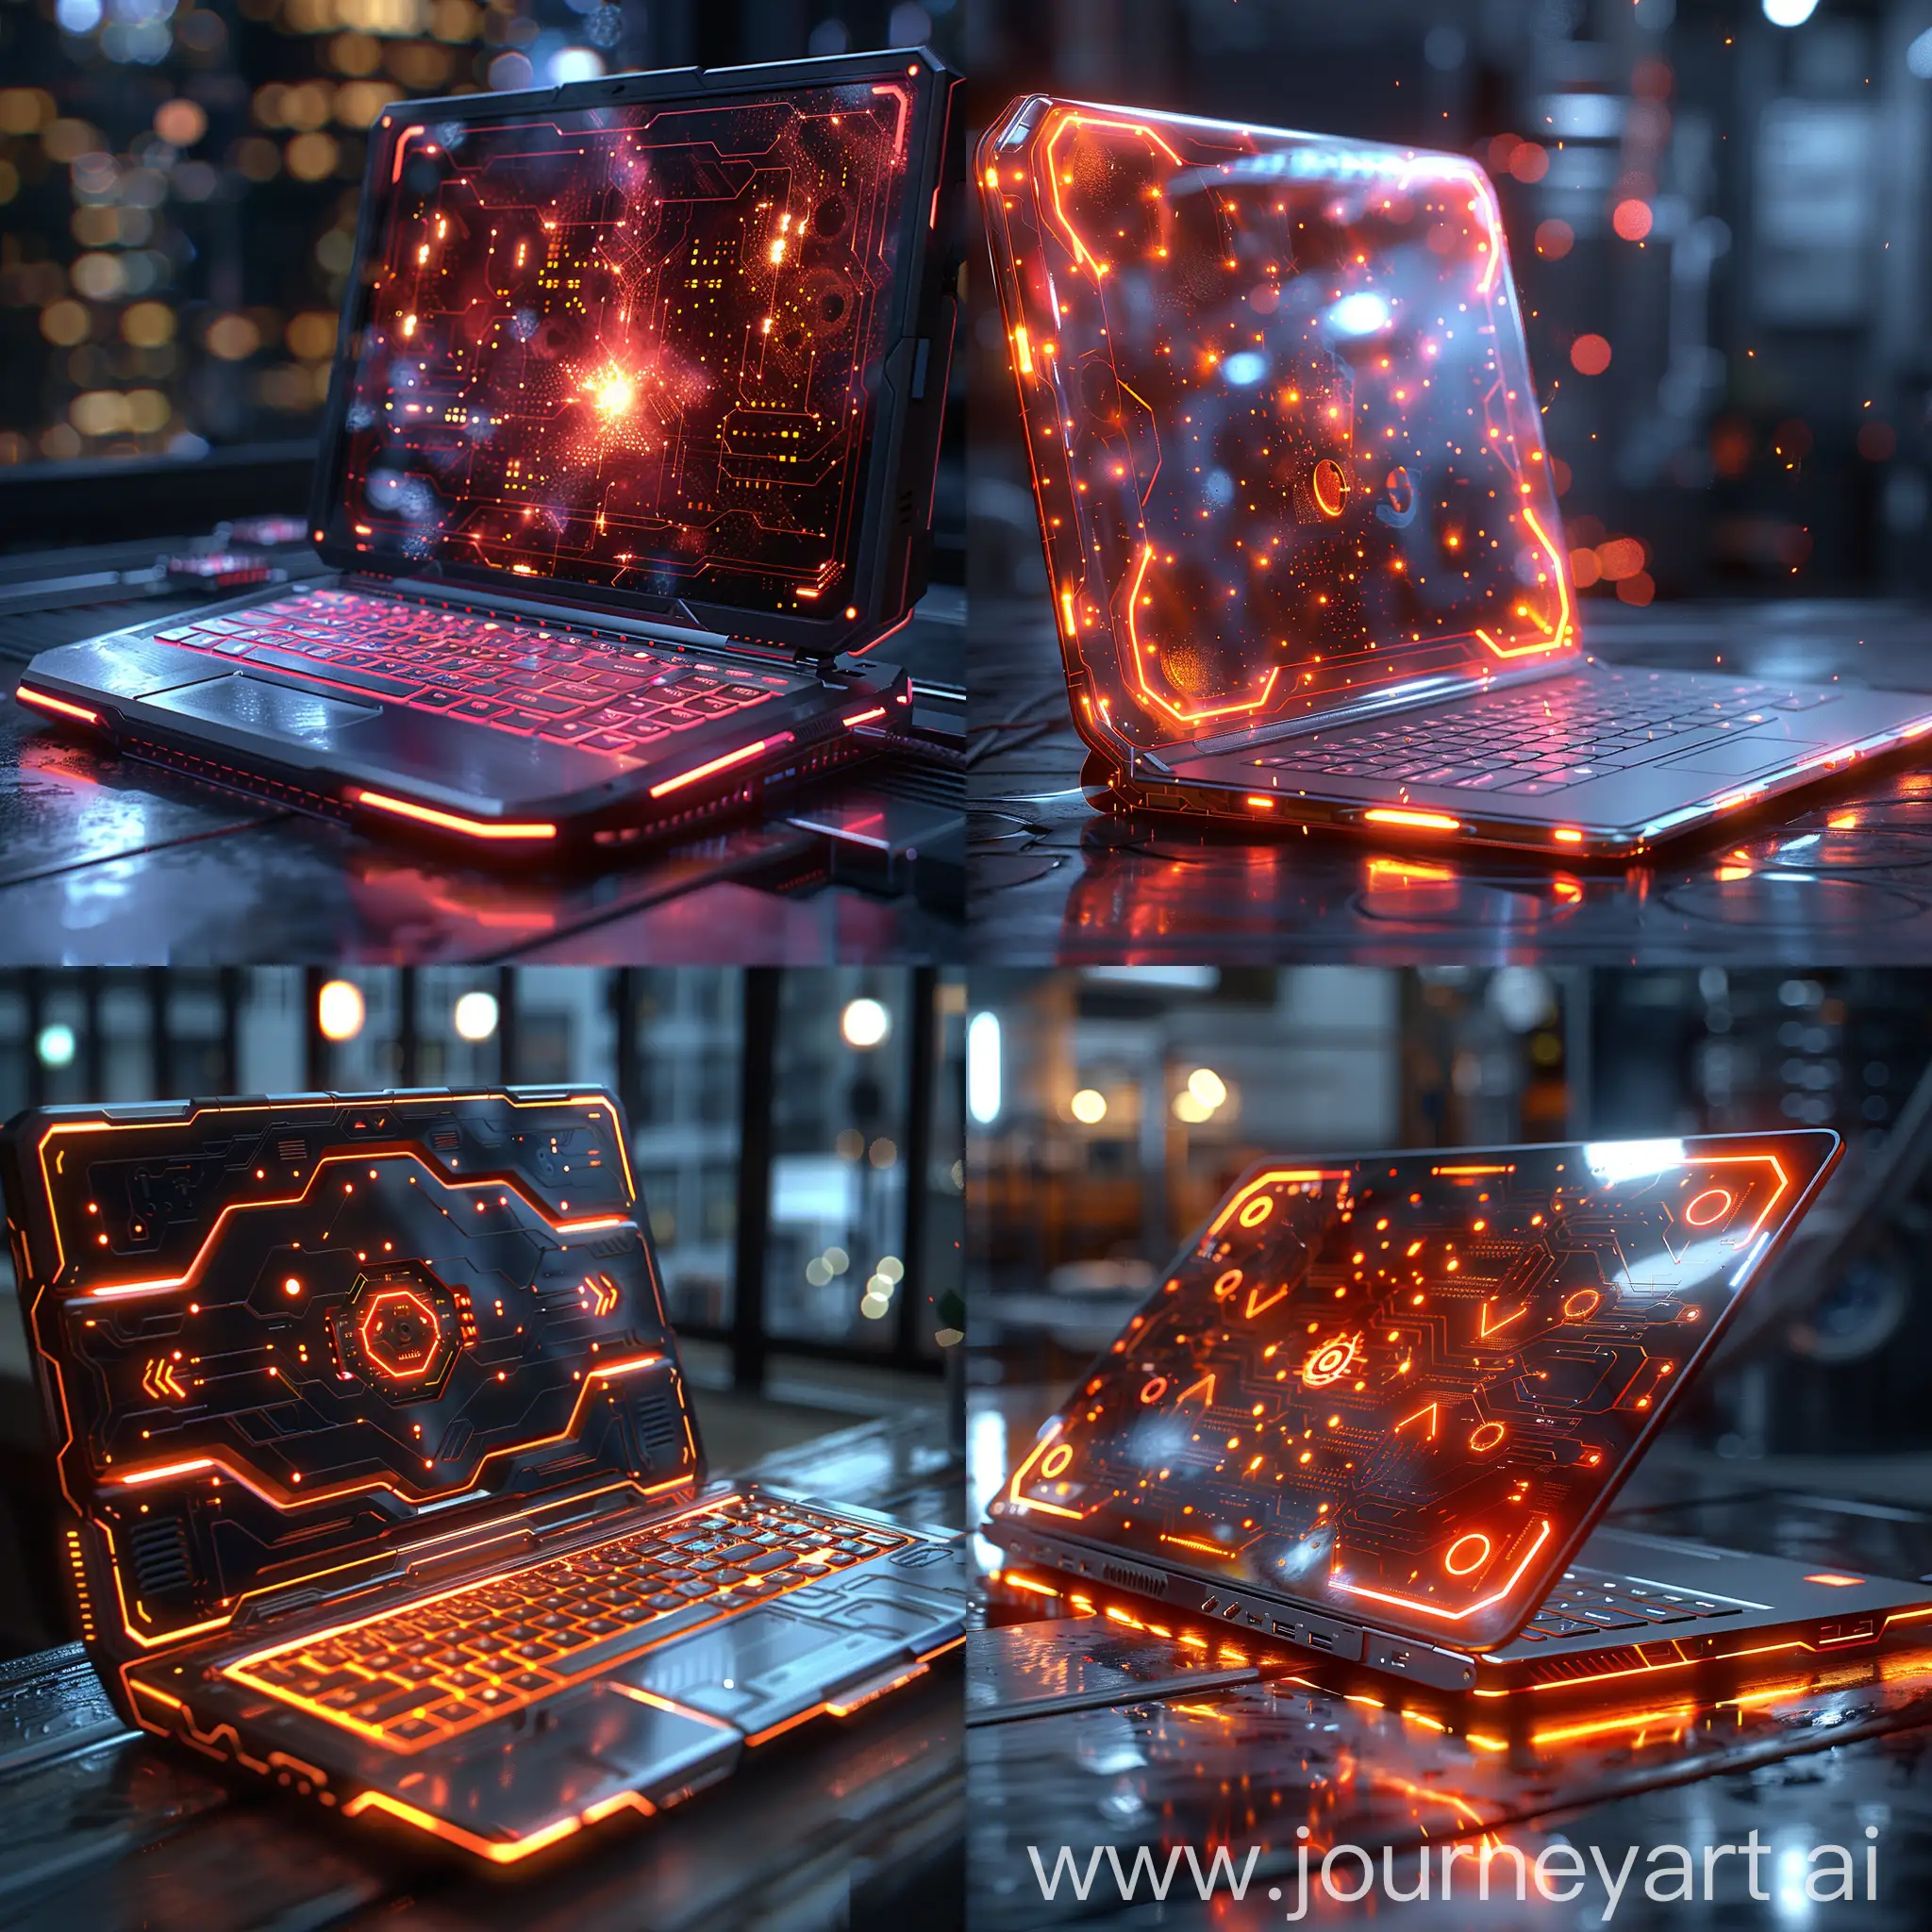 Futuristic-HighTech-Laptop-with-Dynamic-Octane-Render